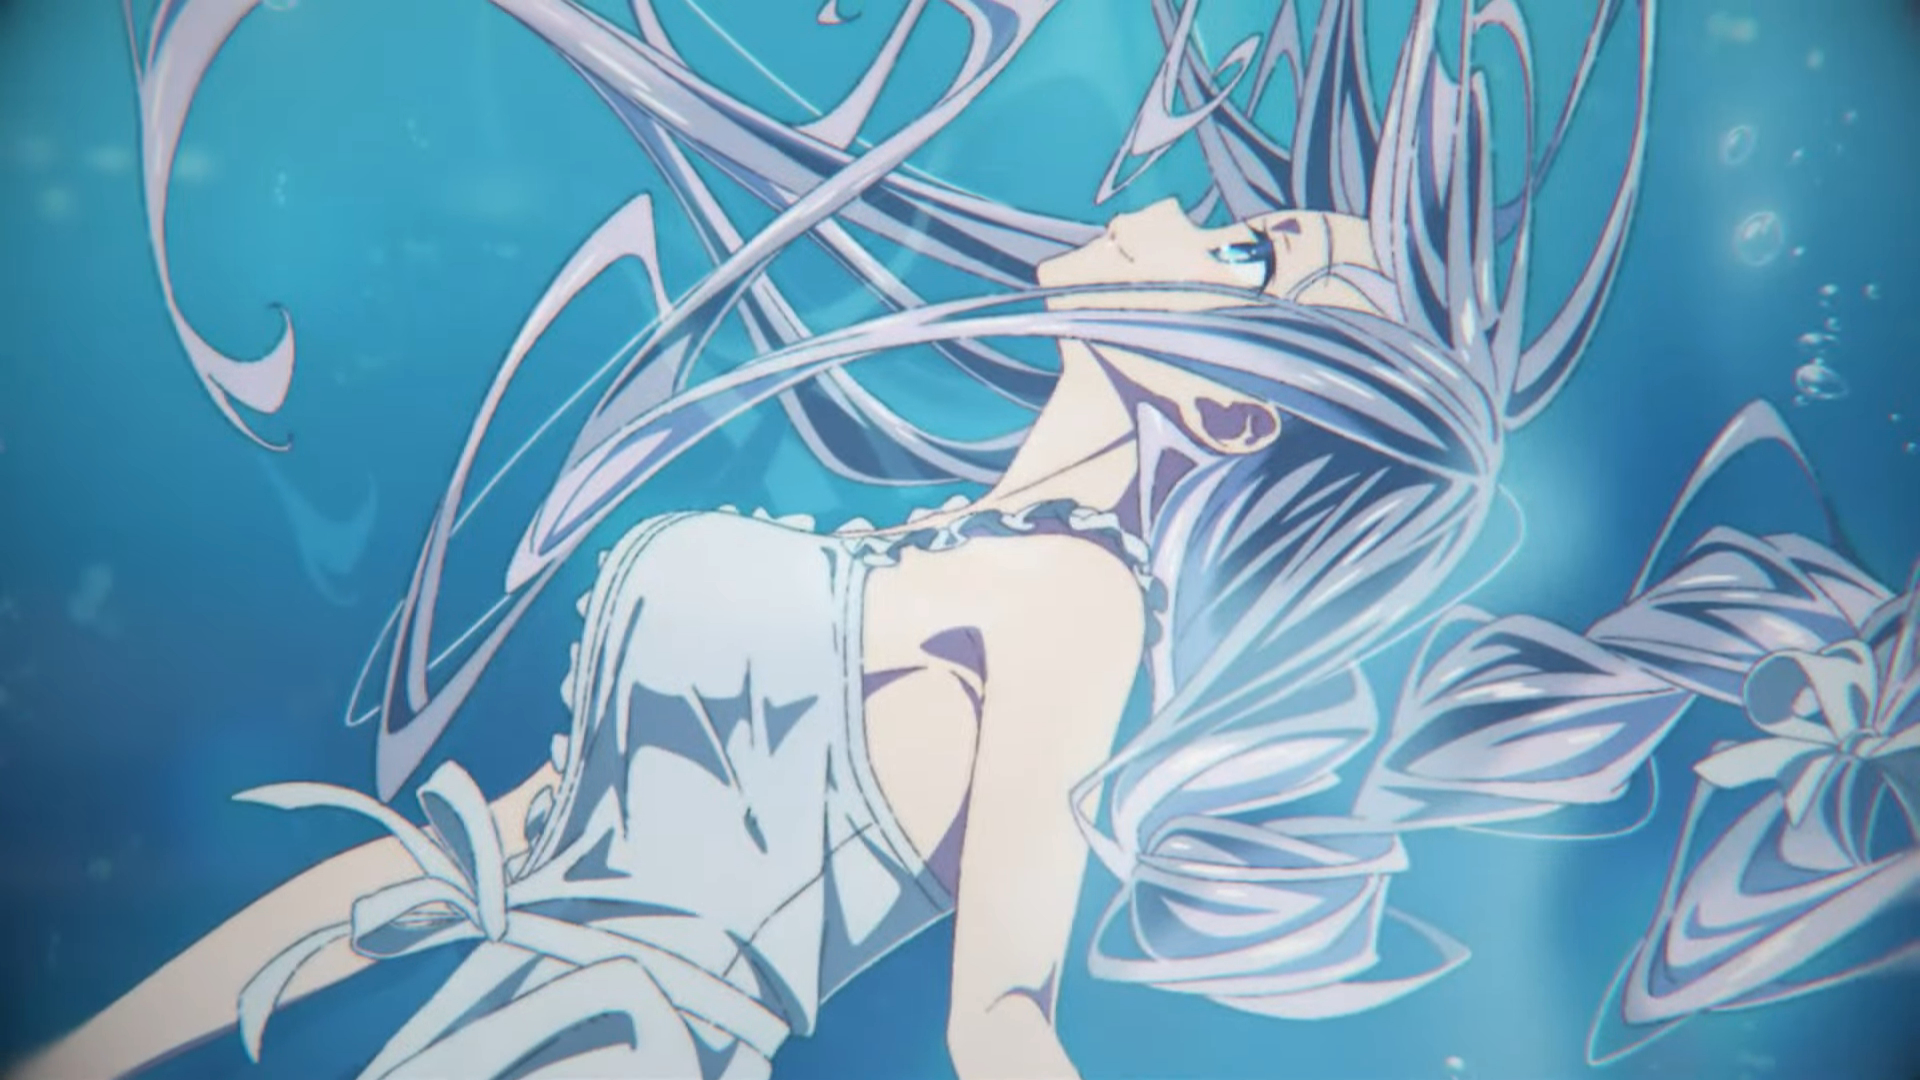 Date a Live Season 5 New Teaser, Release Update & More! 